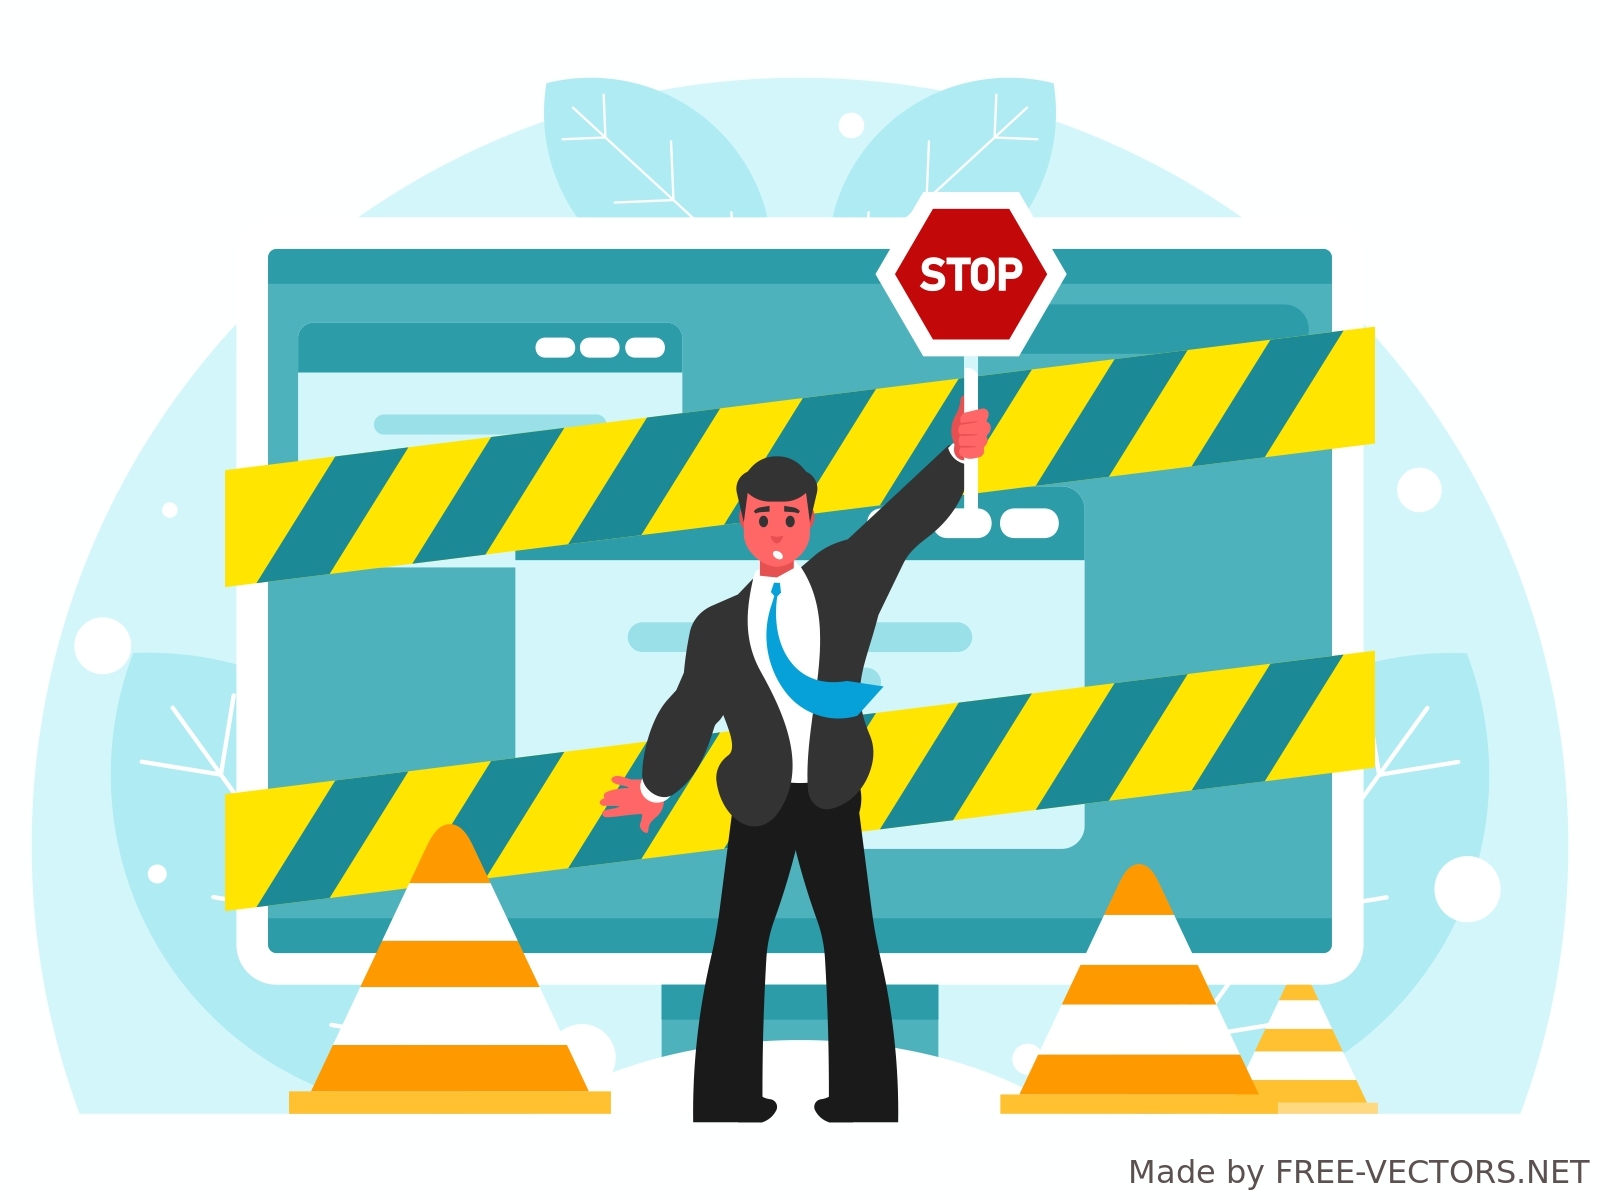 STOP sign vector